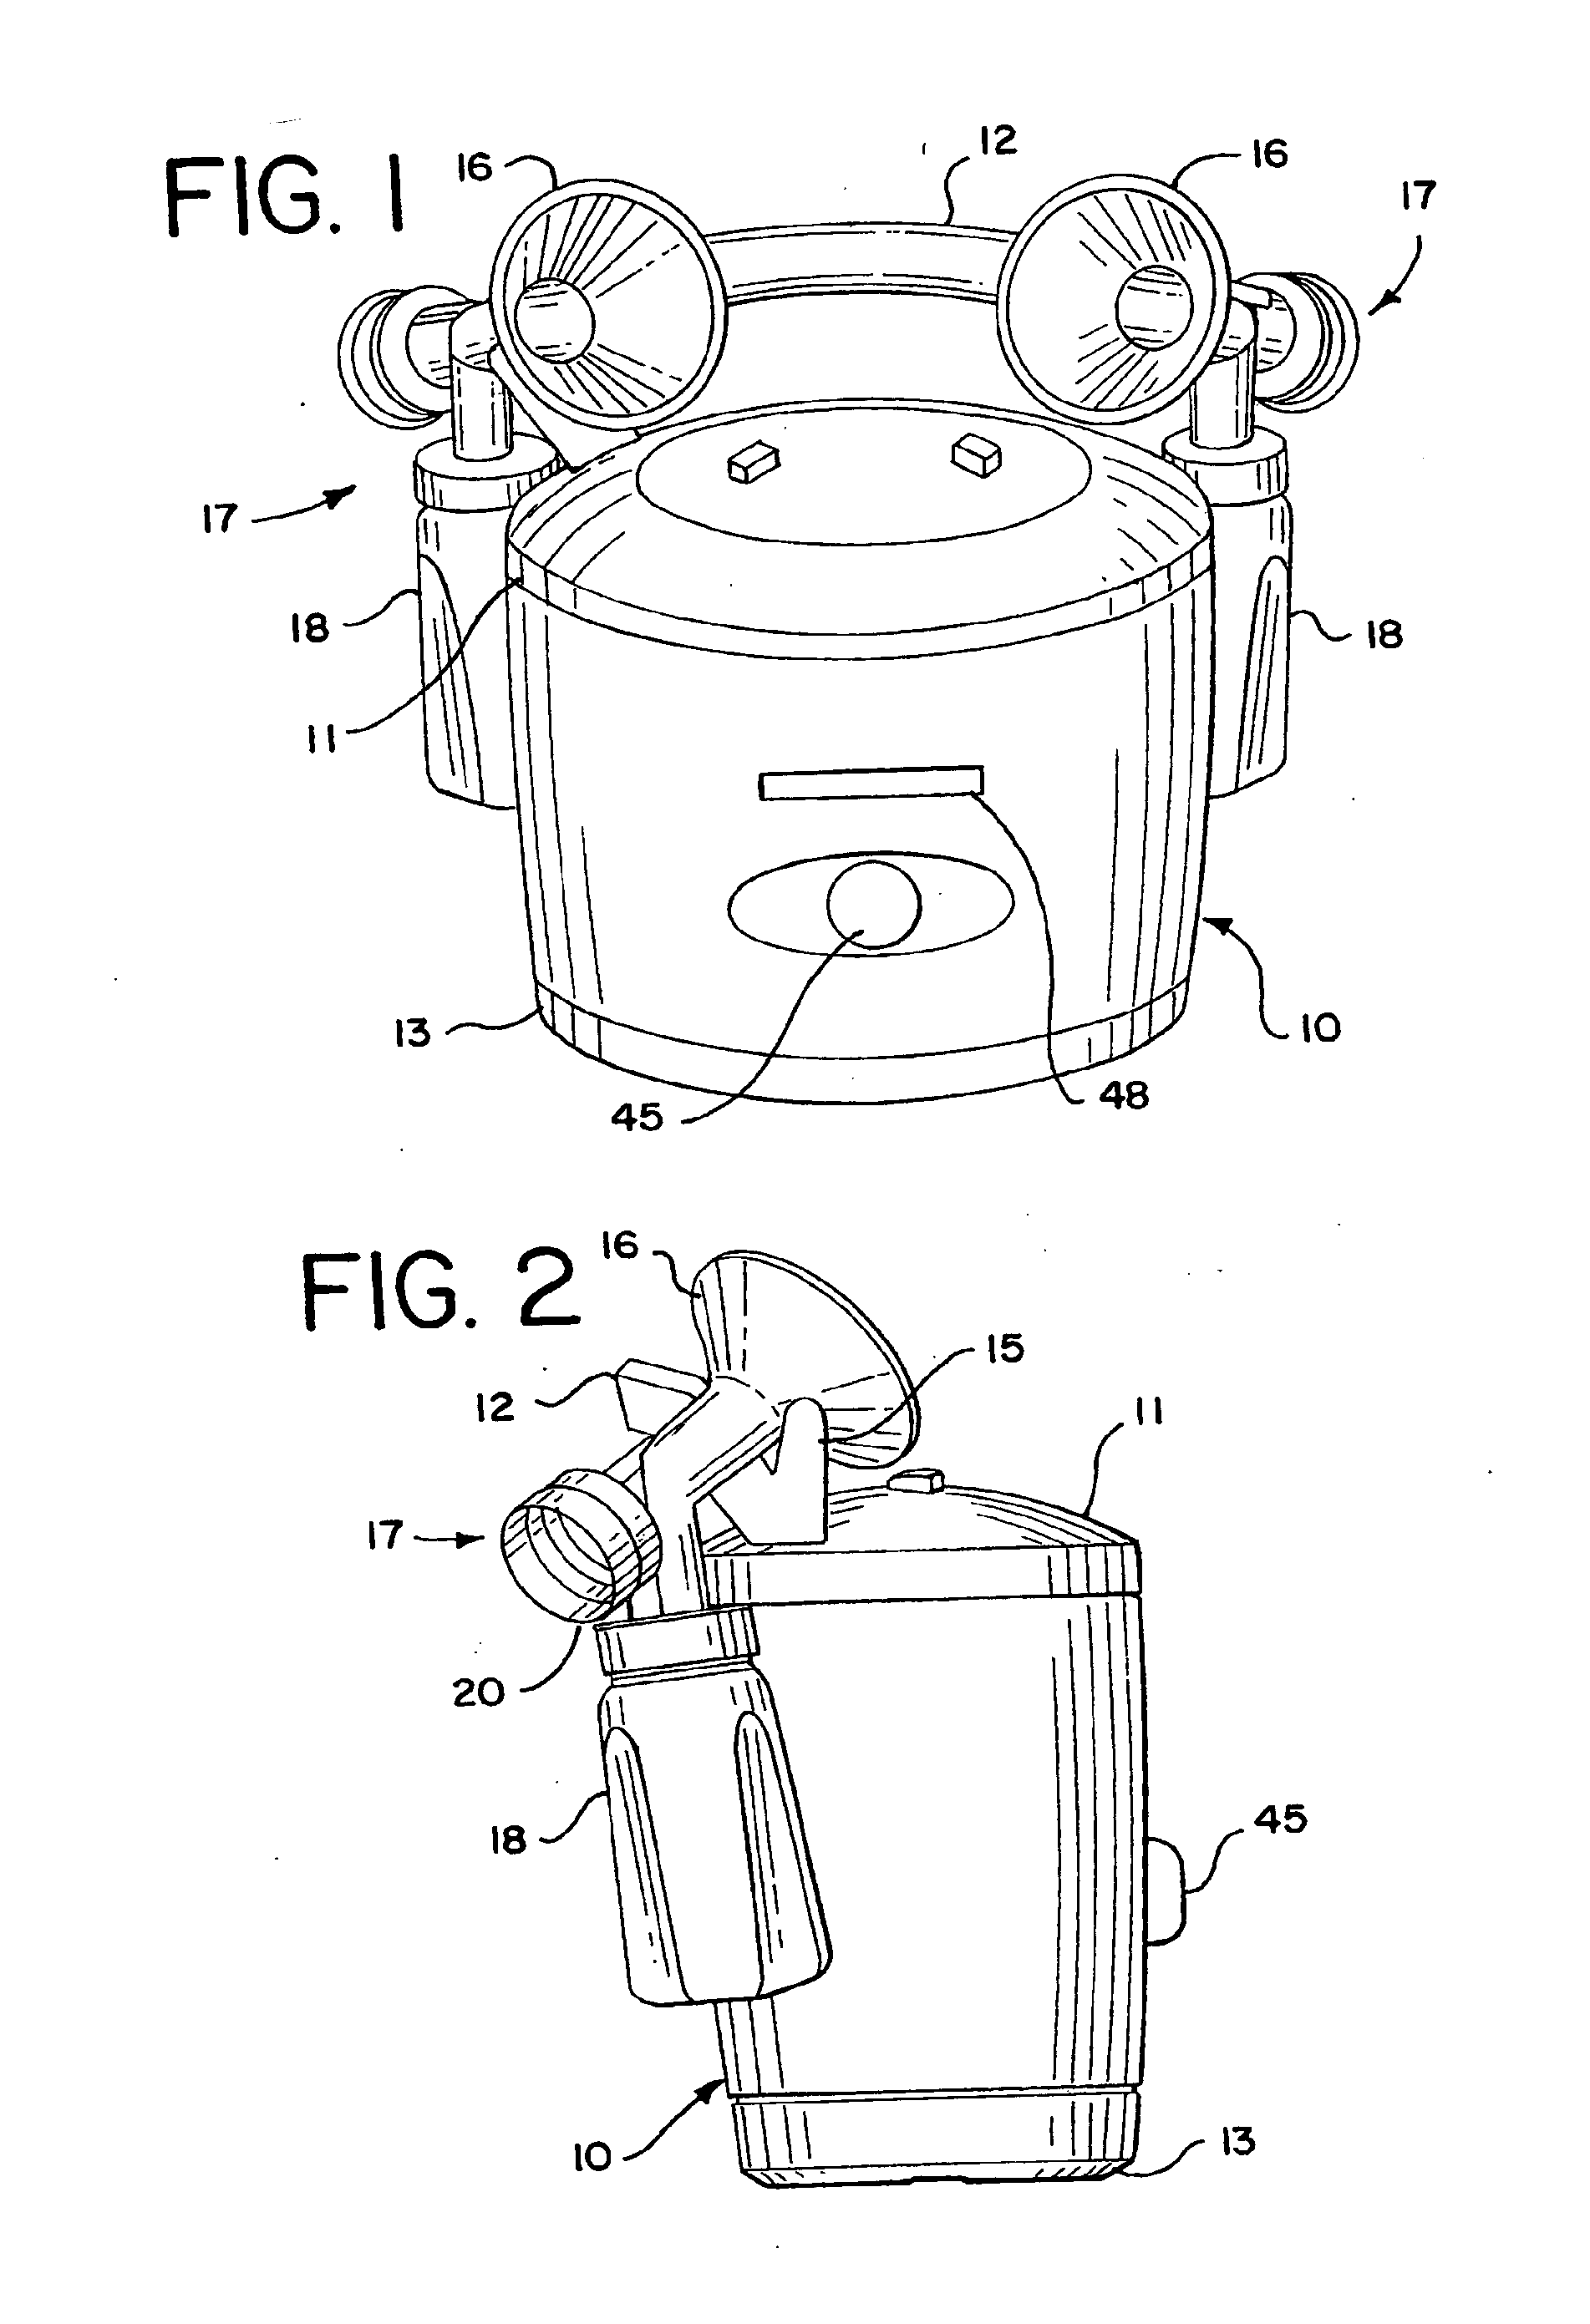 Suction Sequences for a Breastpump